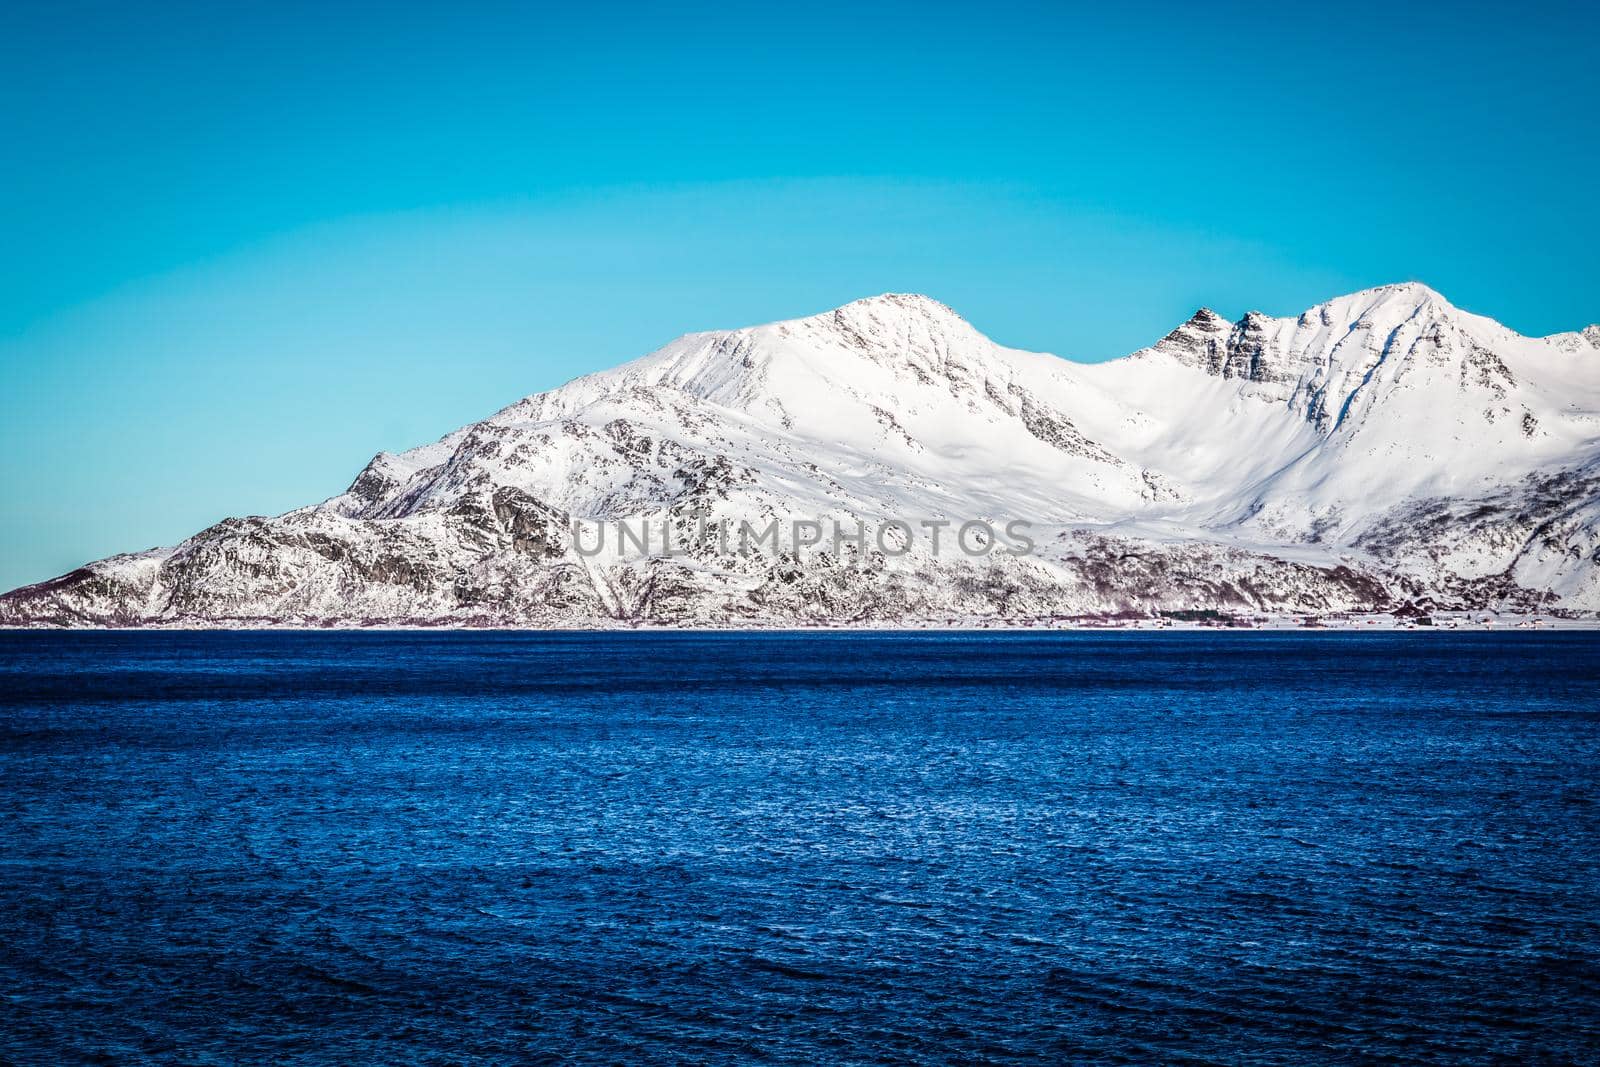 Snow Mountain with Fjord in foreground (Norway near Tromso)